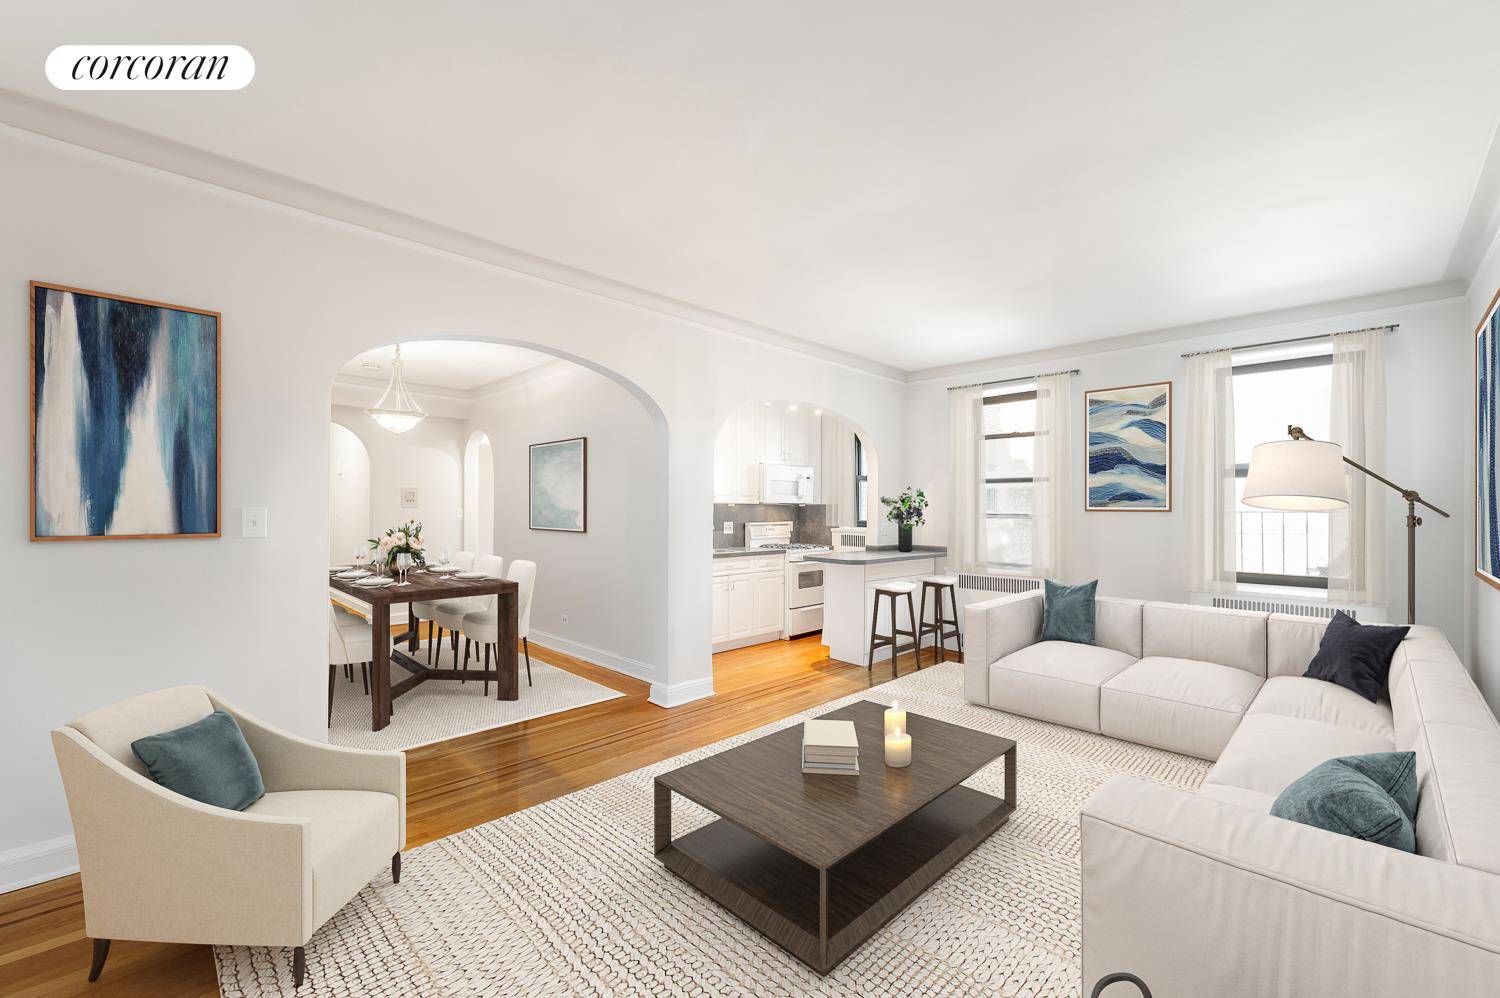 Welcome to The Concord, a stunning and spacious pre war co op just minutes away from Manhattan.